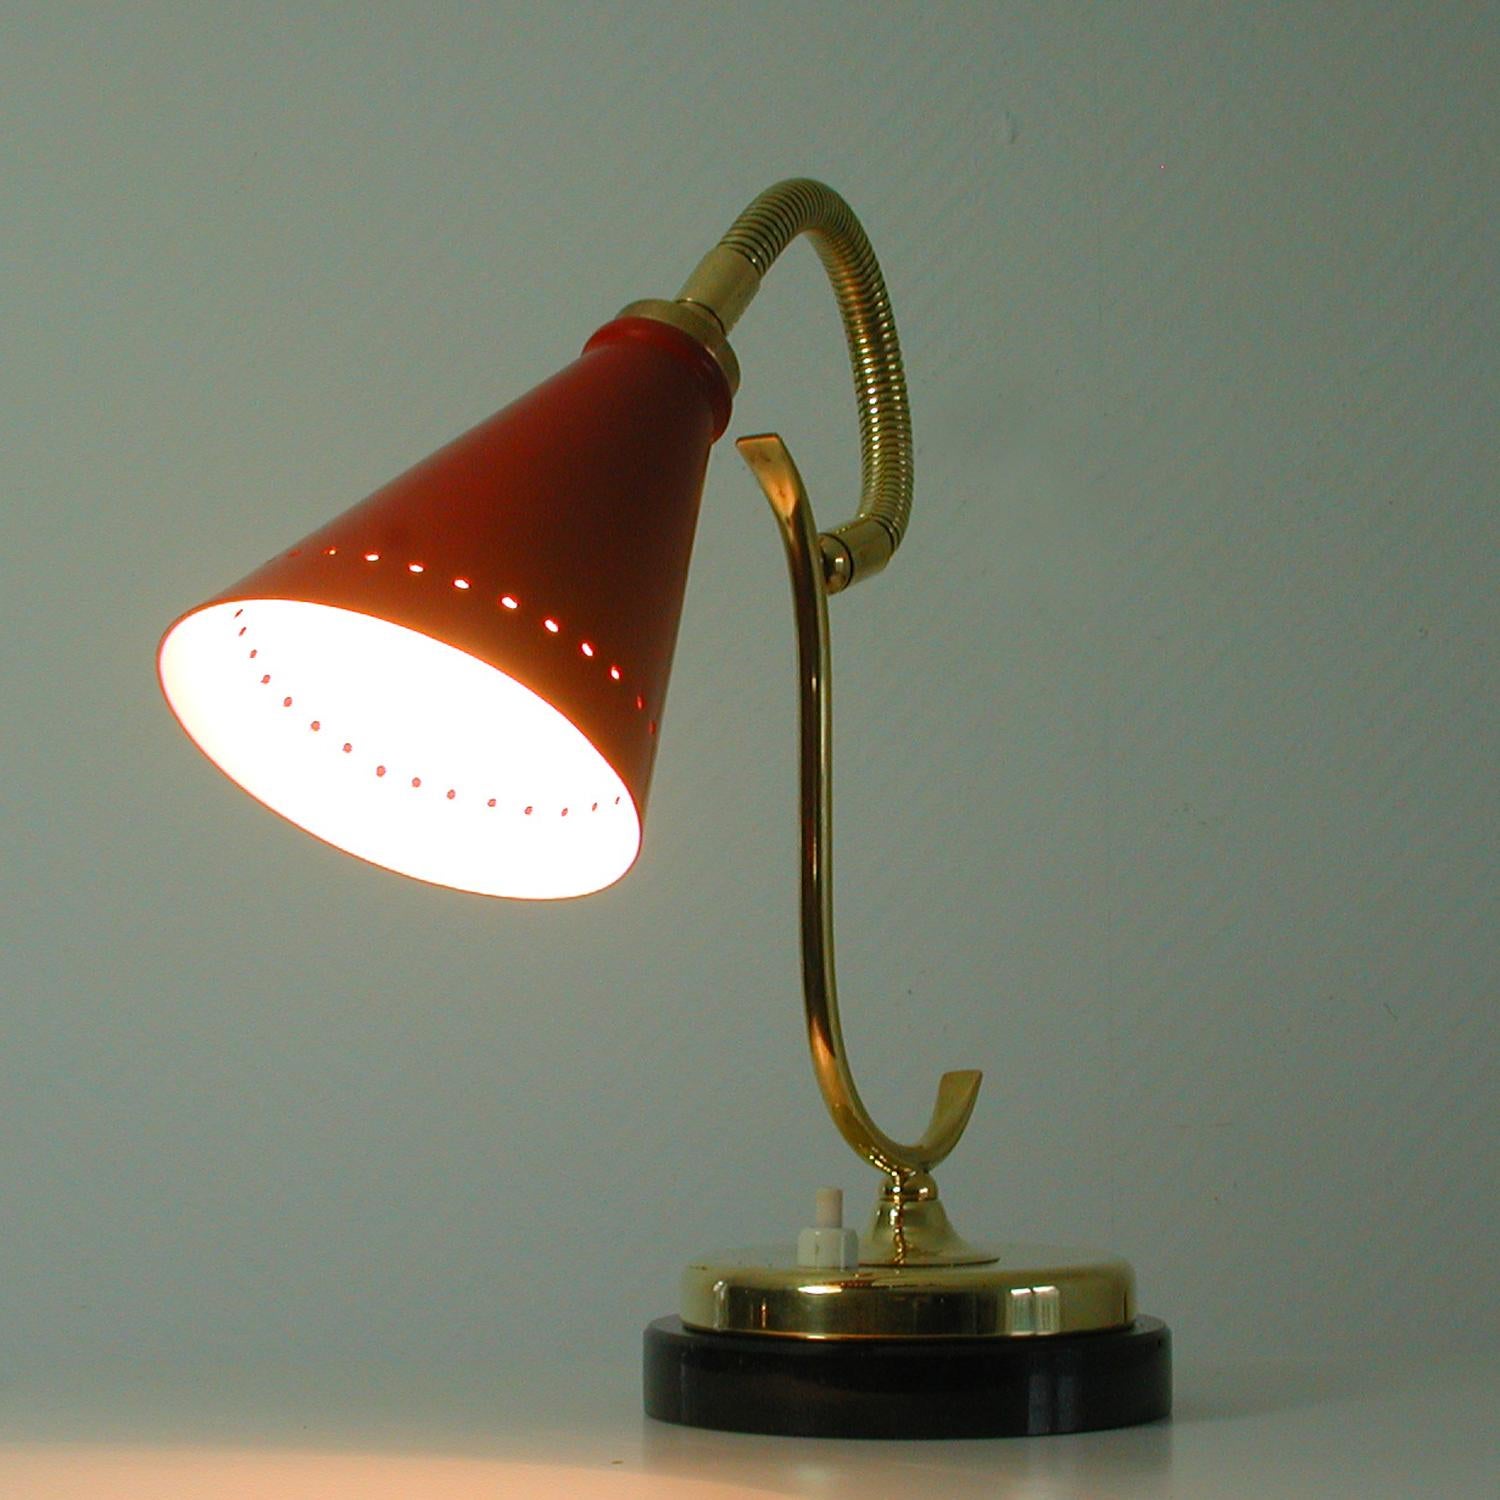 French Midcentury Red Brass and Marble Gooseneck Table Lamp, 1950s For Sale 4